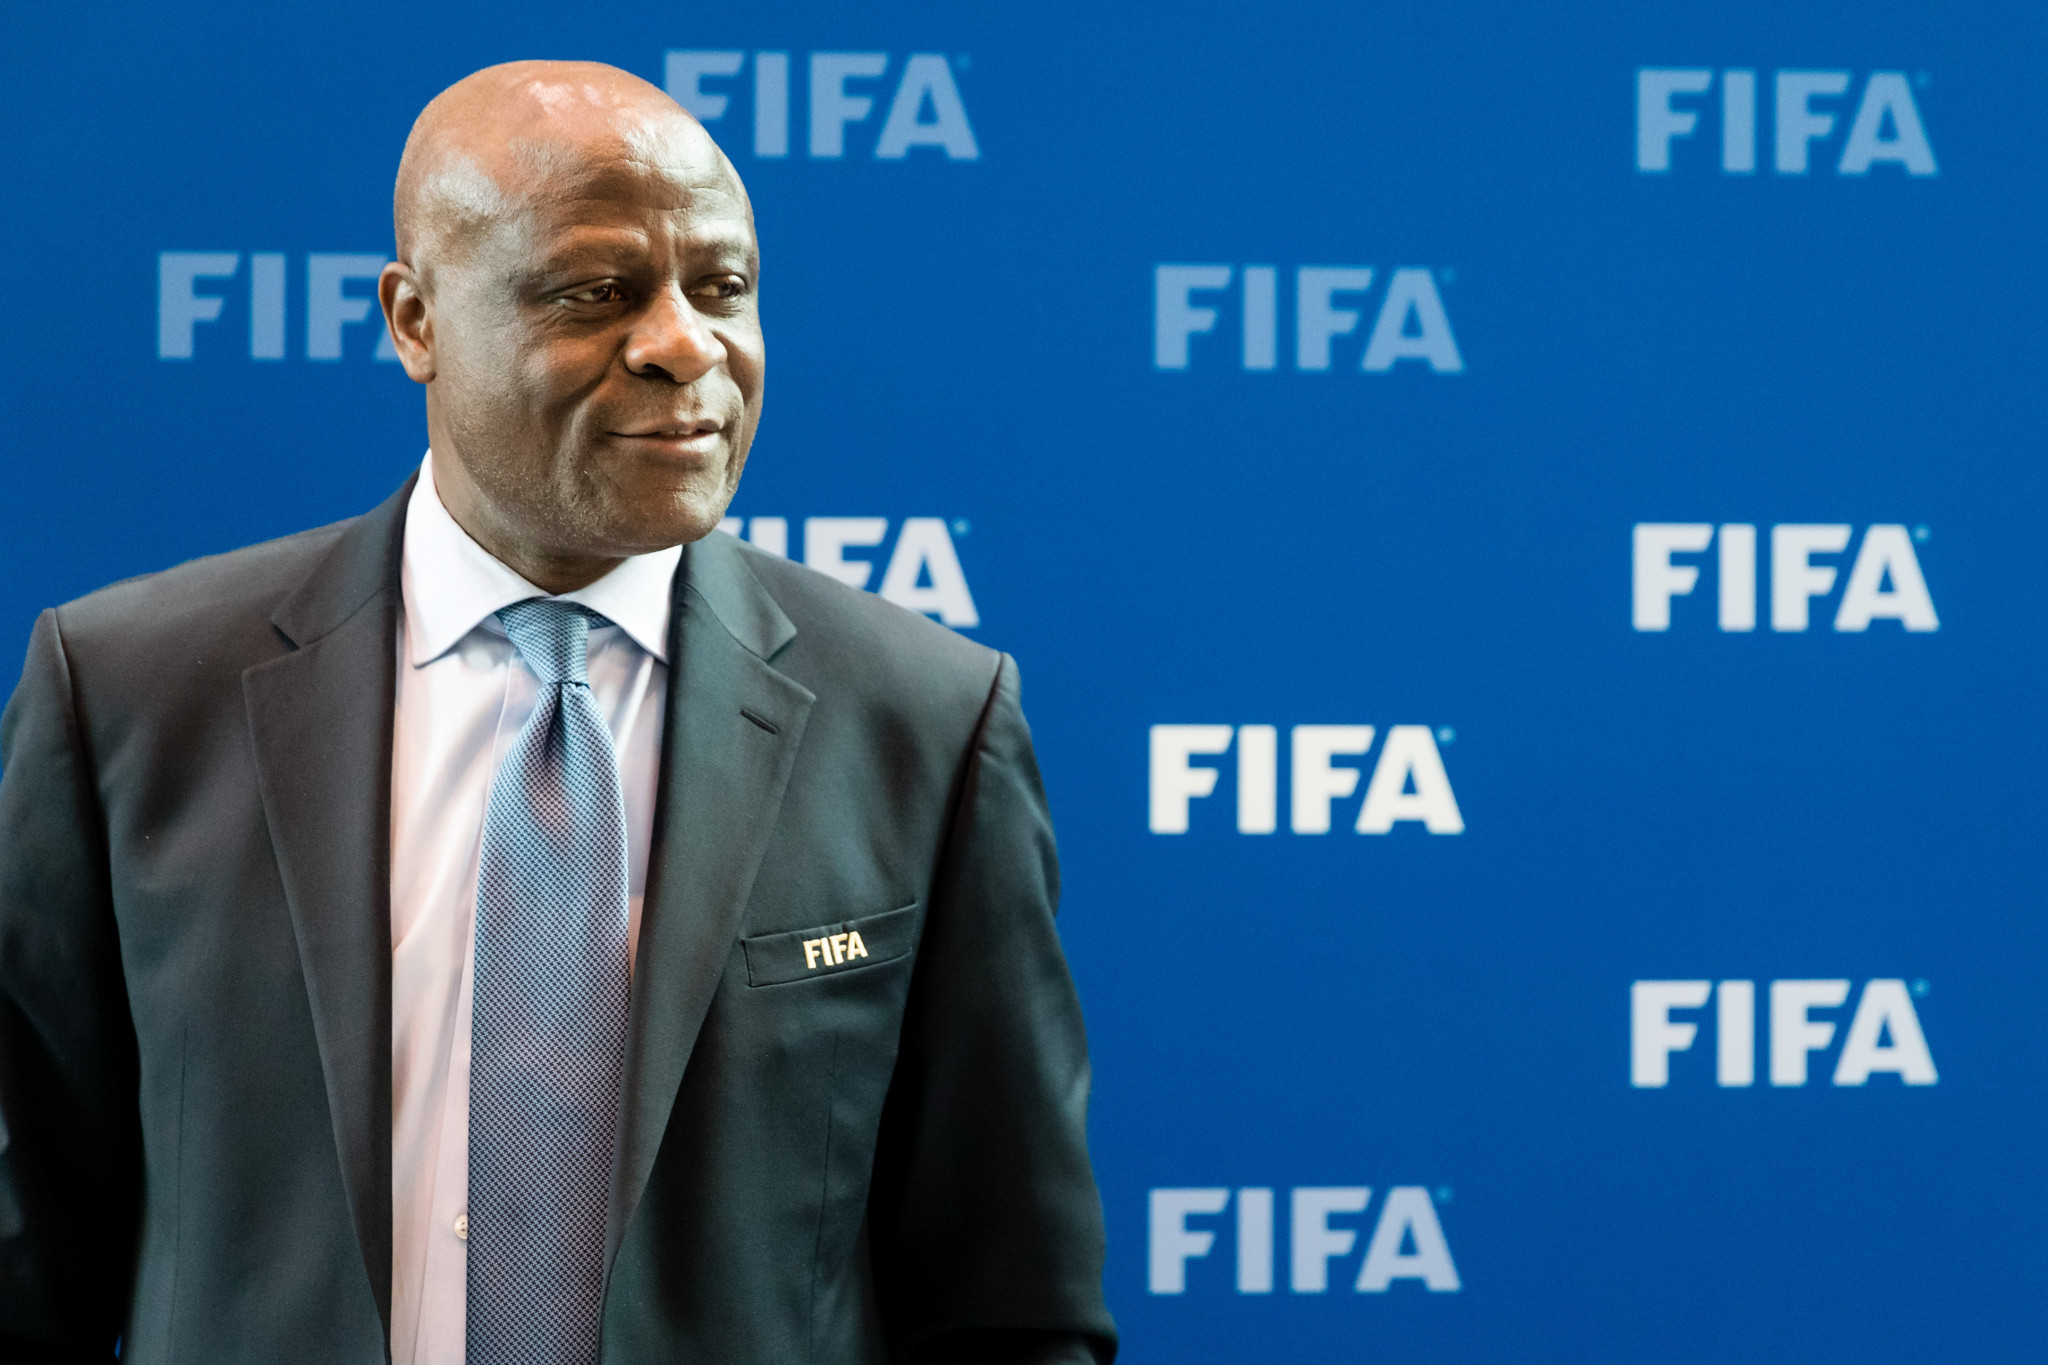 FIFA Council member Constant Omari has been arrested on suspicion of corruption ©Getty Images